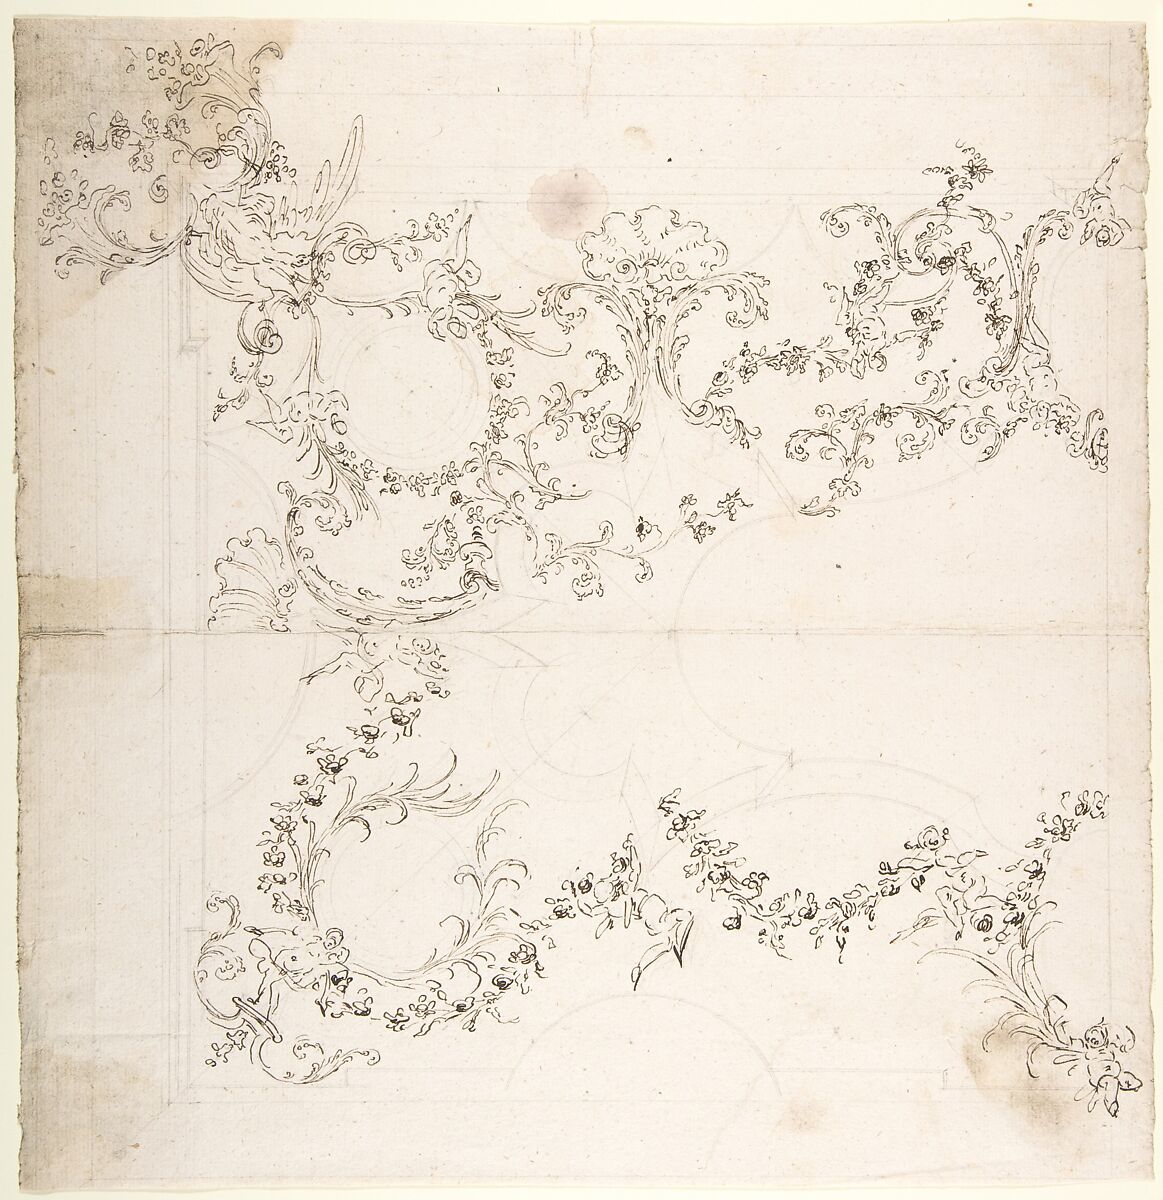 Design for a Ceiling Decoration with Putti and Garland Motifs., Attributed to Donato Giuseppe Frisoni (Italian, Laino near Como 1683–1735 Ludwigsburg), Pen and brown ink, over graphite or leadpoint with ruled and compass construction 